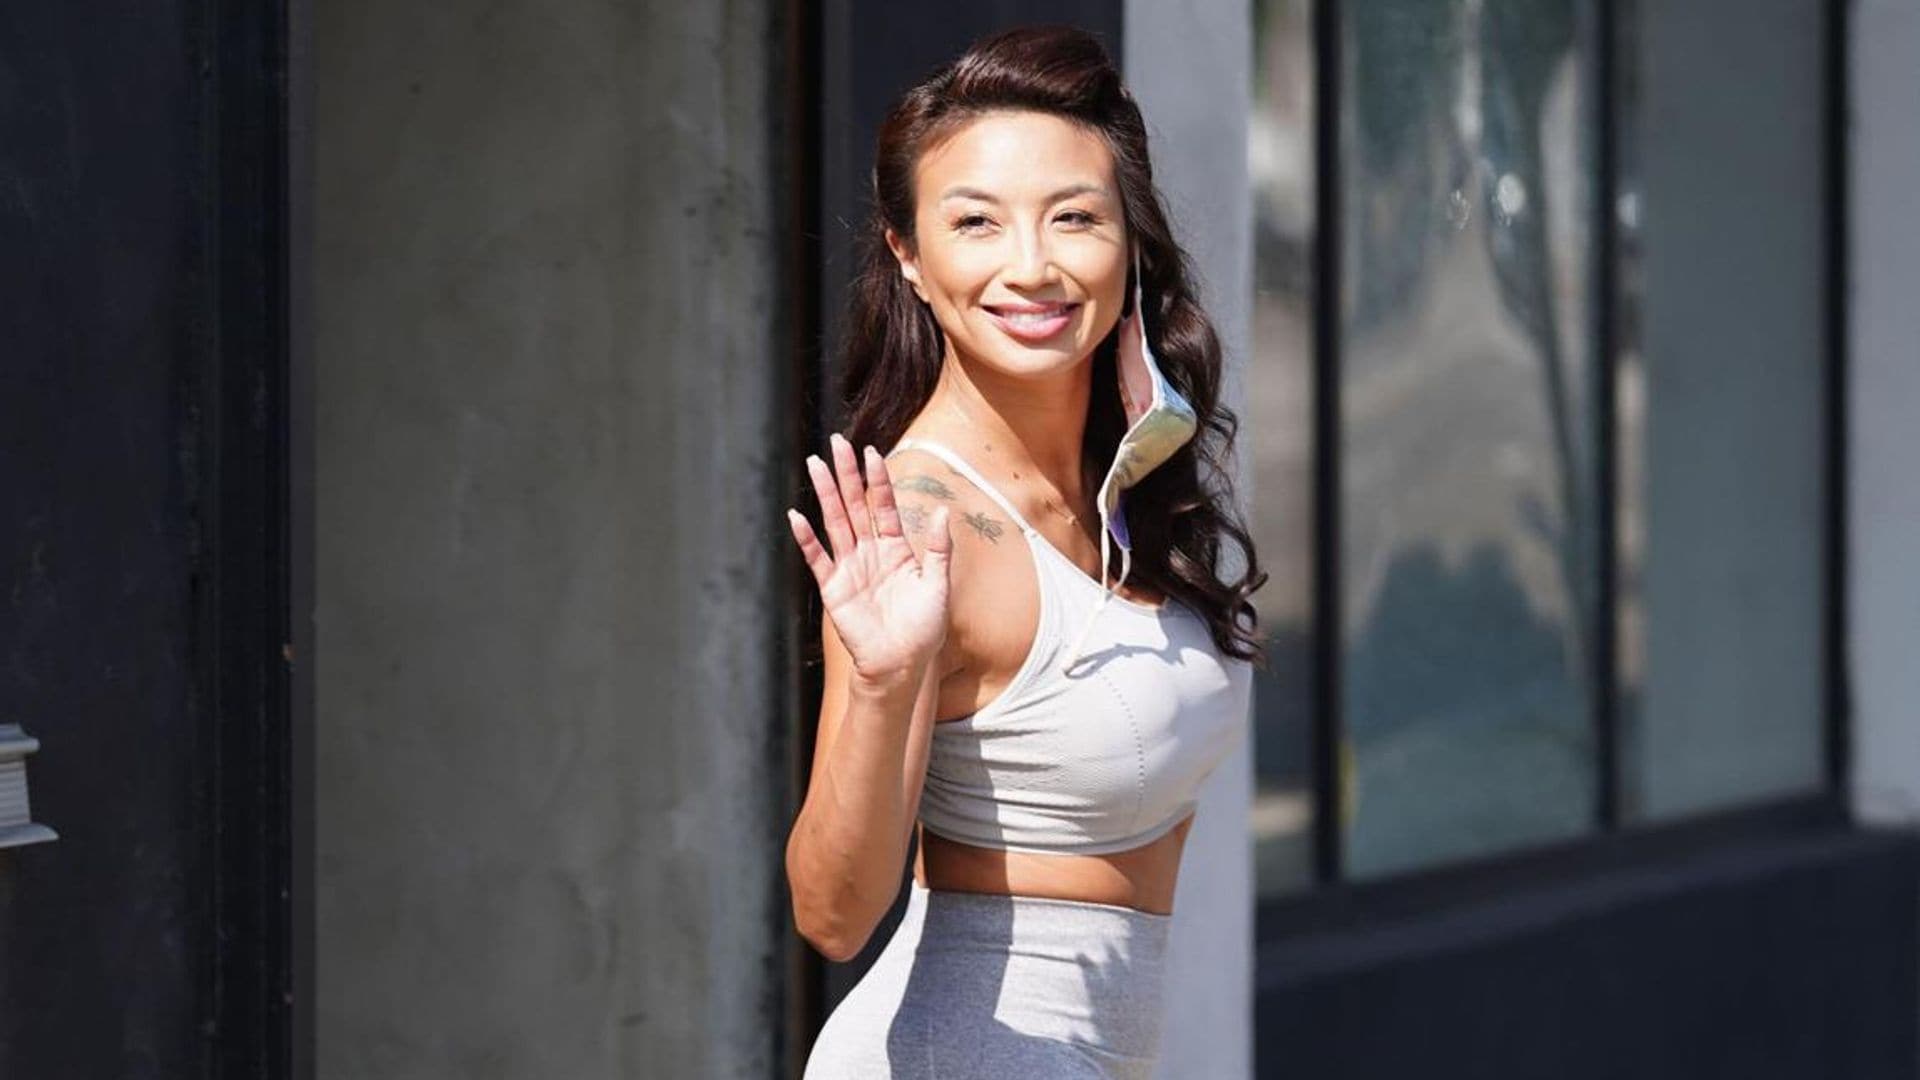 Jeannie Mai says goodbye to DWTS after being diagnosed with life-threatening condition